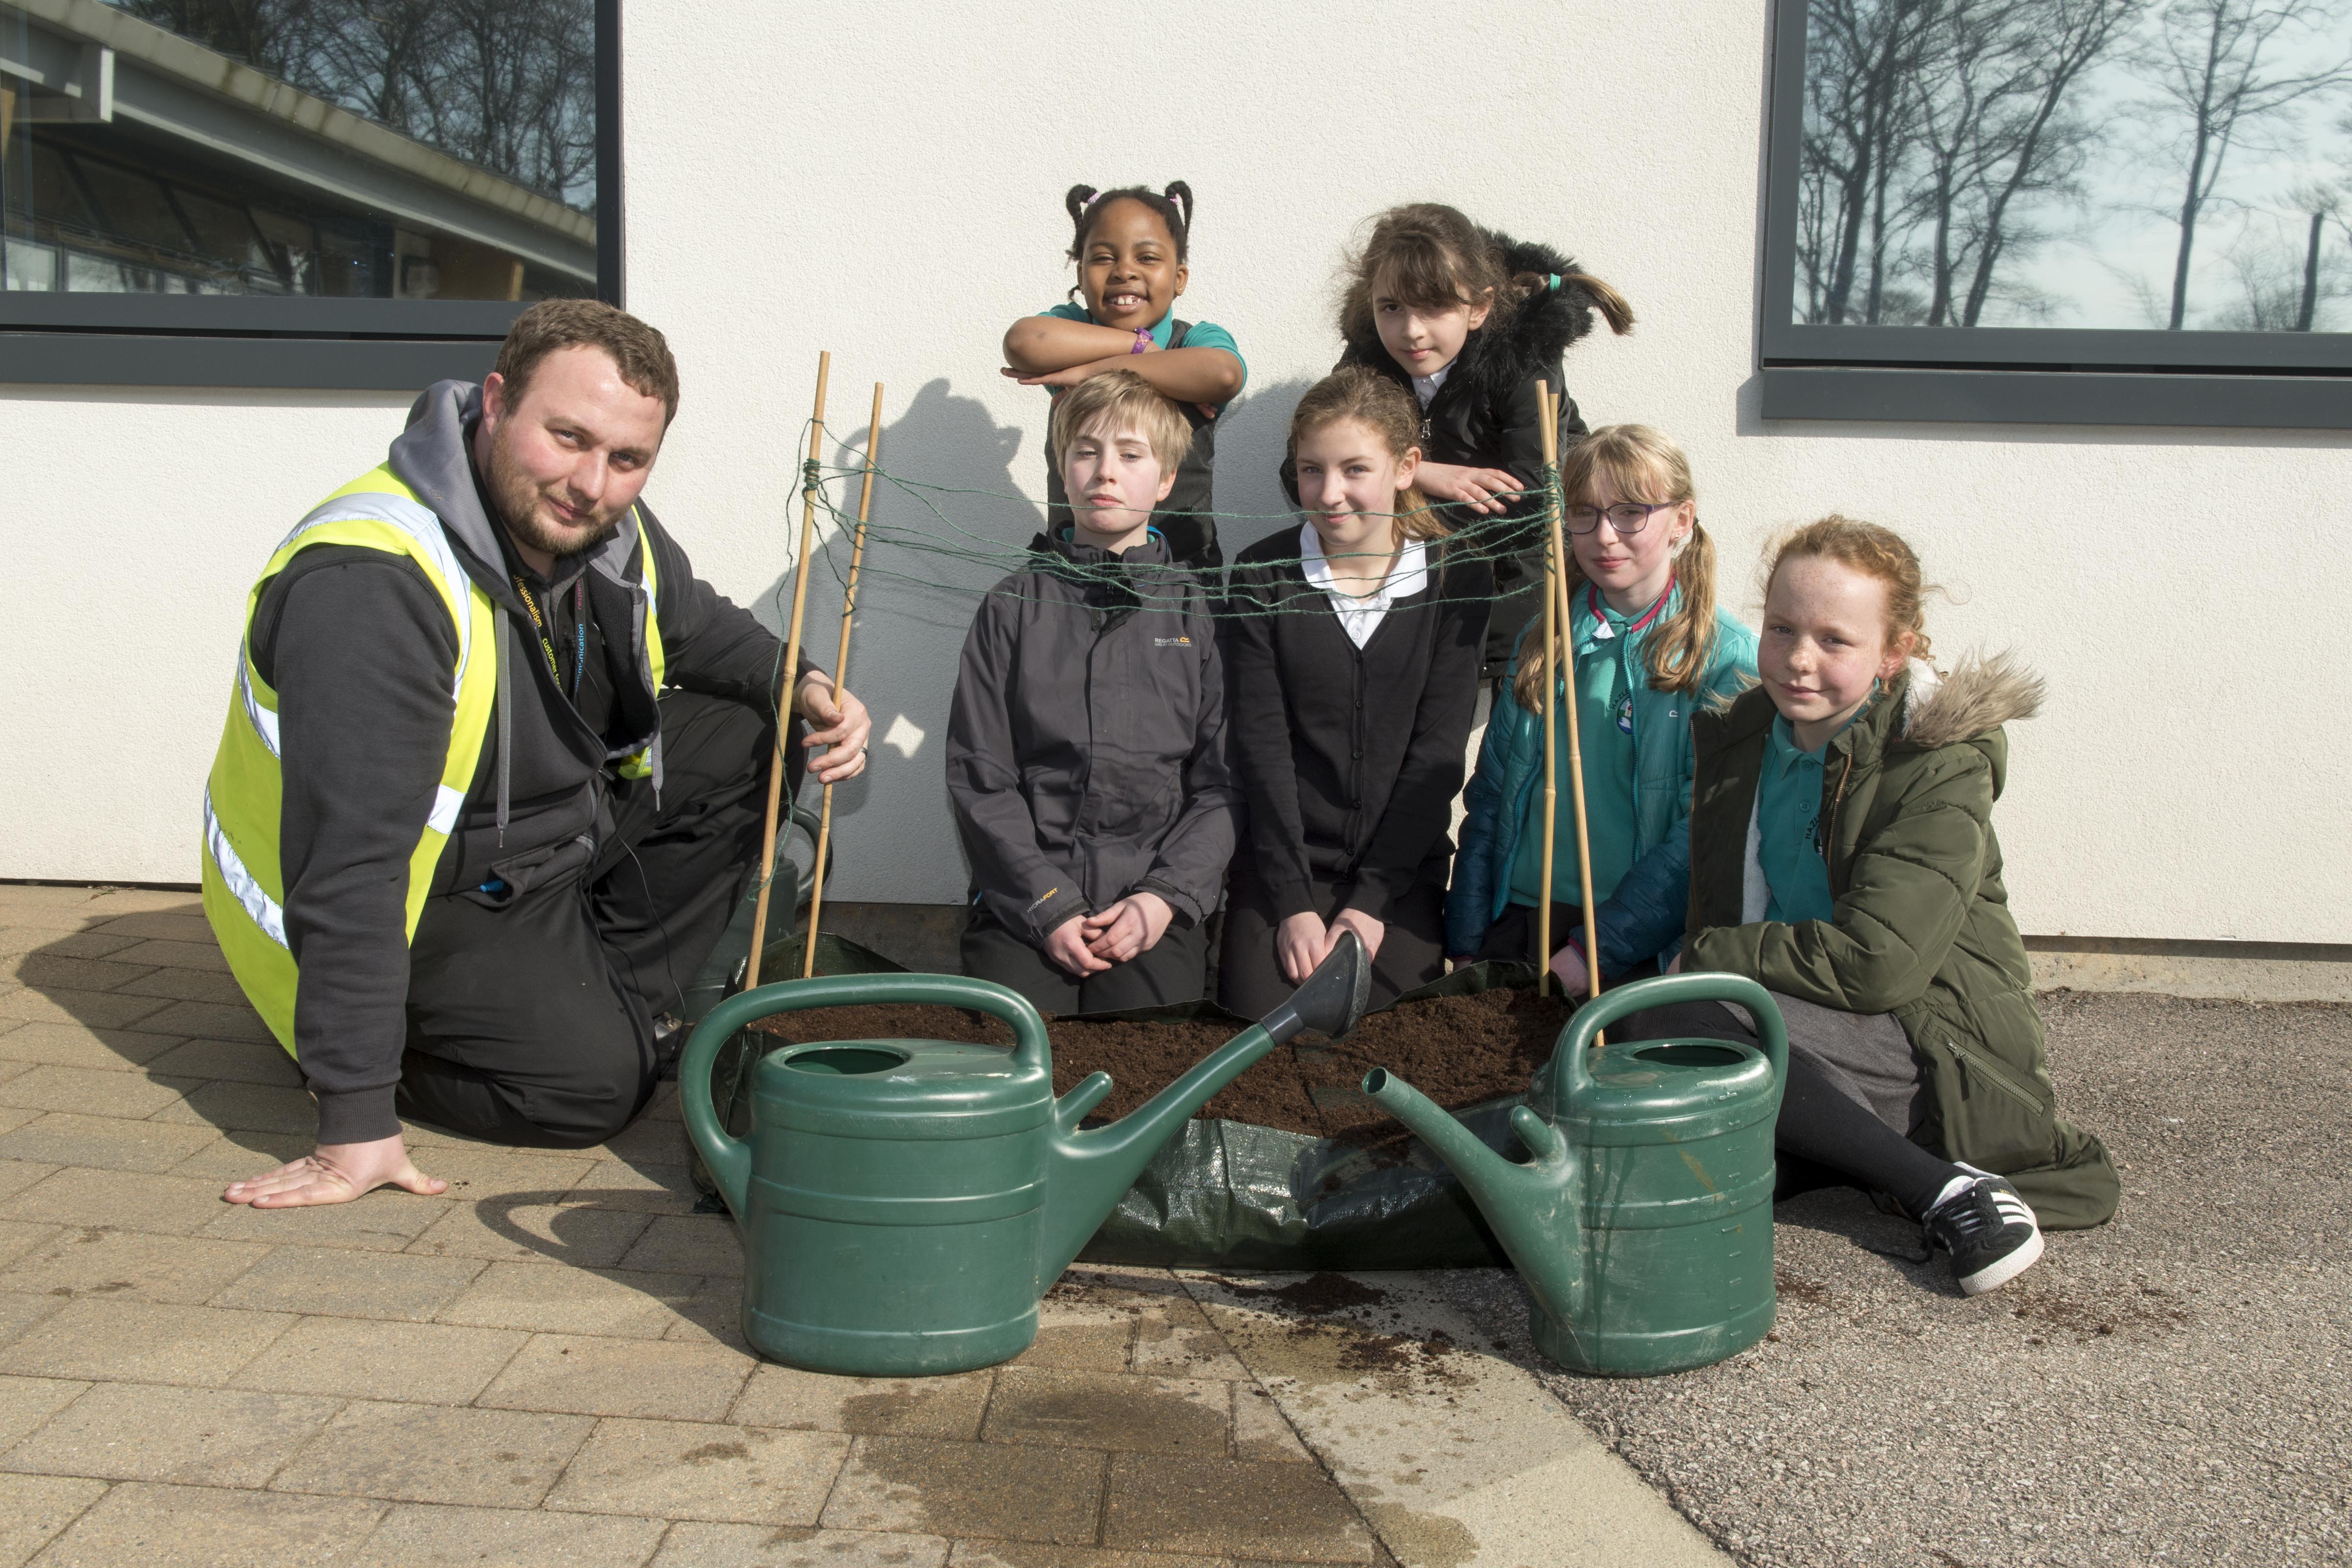 Council gardener Danny Shand with pupils from Hazlehead primary school. L-R Danny Shand with  esther burns, Namiso Kanganuarara;Emma Lewis;,,Molly Muldoon; Rosheh Tabari;  eilidh gorman;